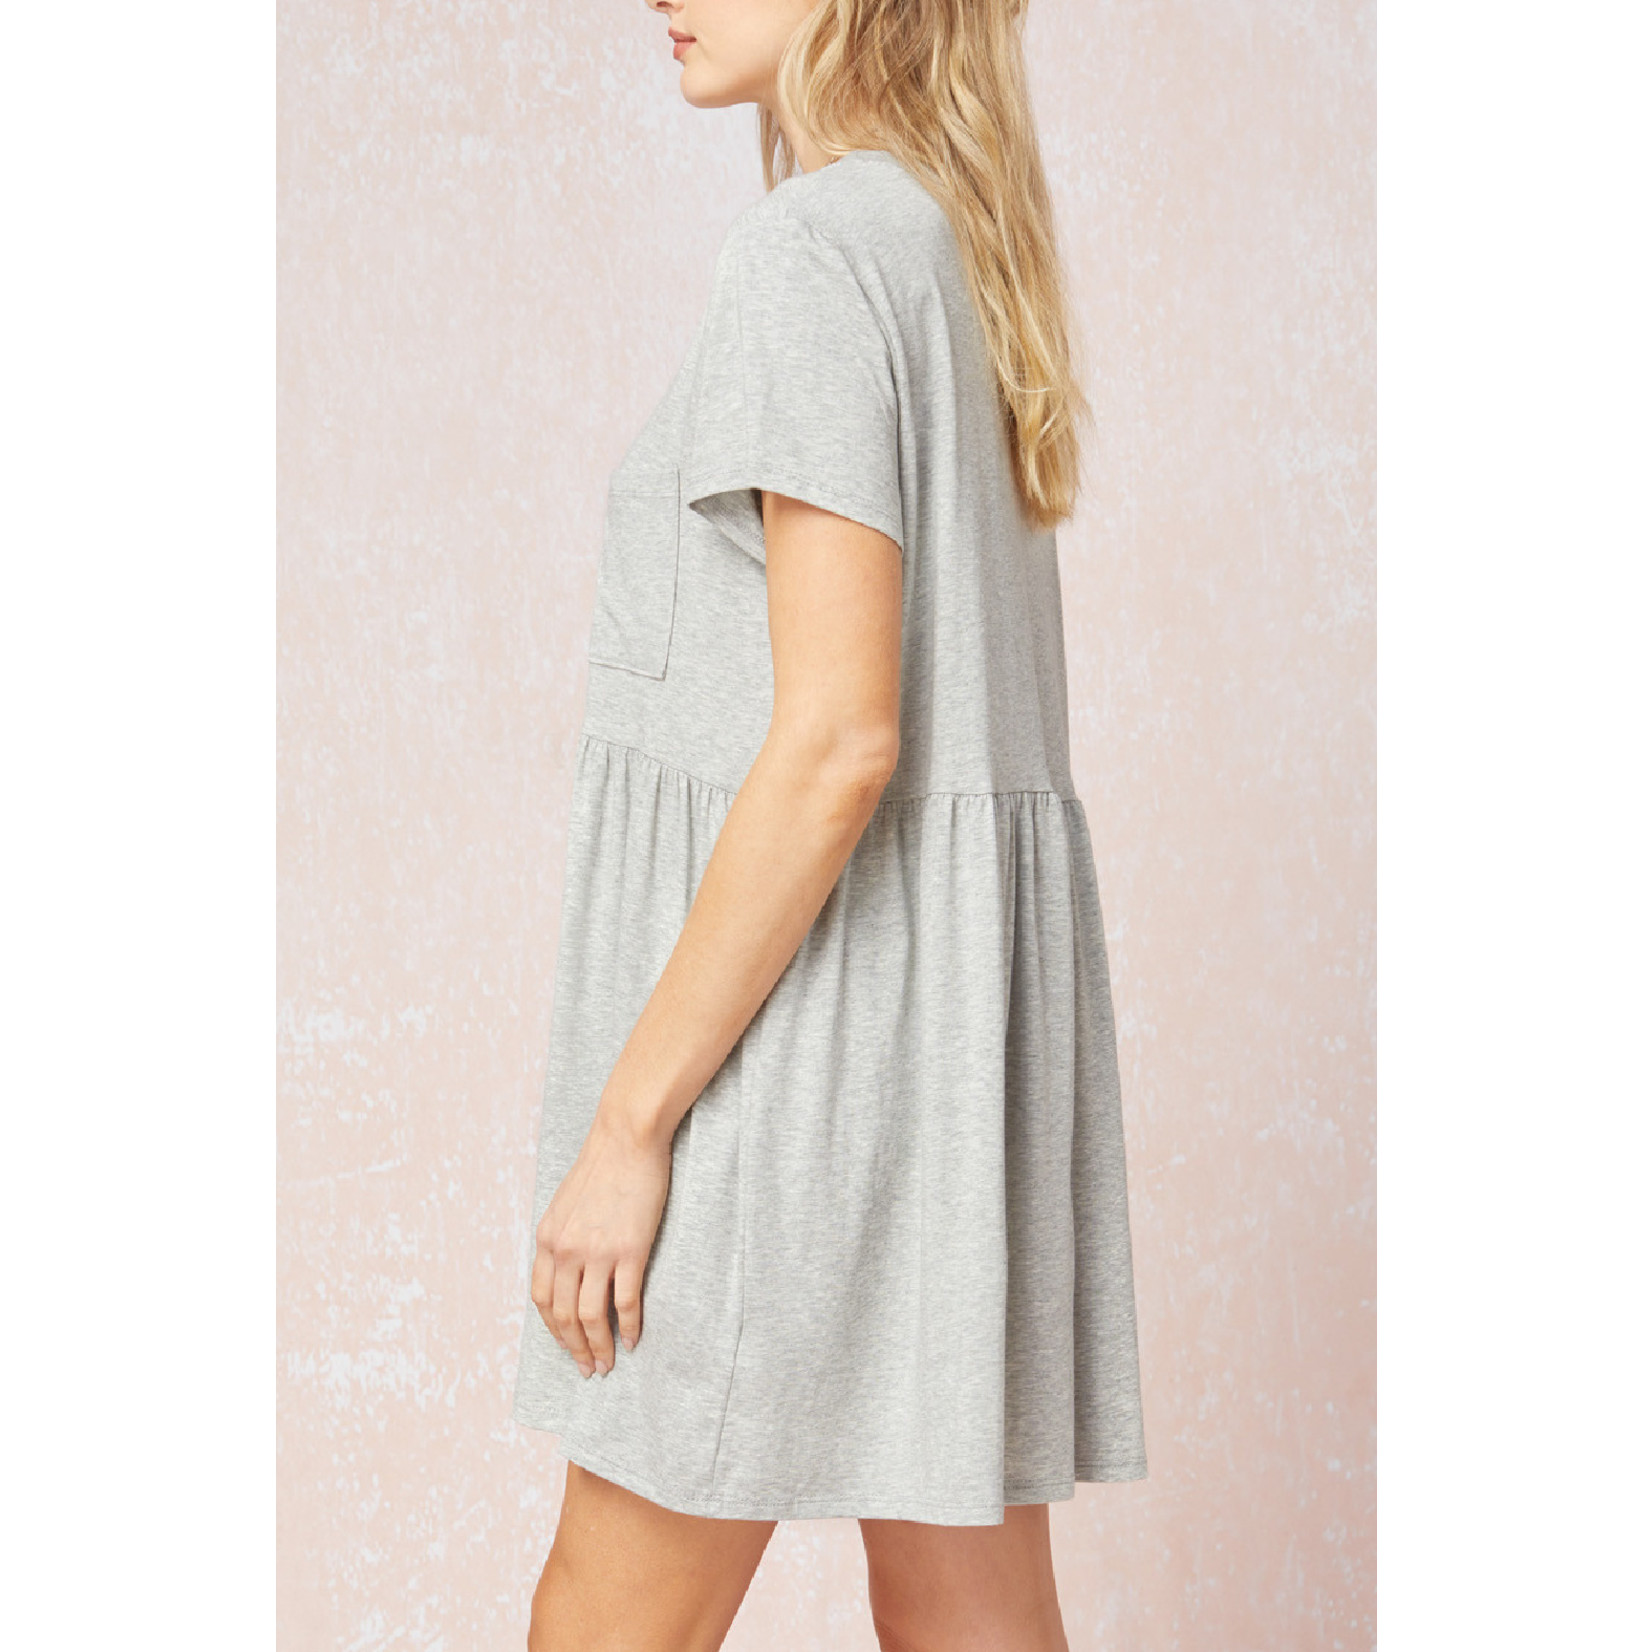 Entro Casual babydoll style dress